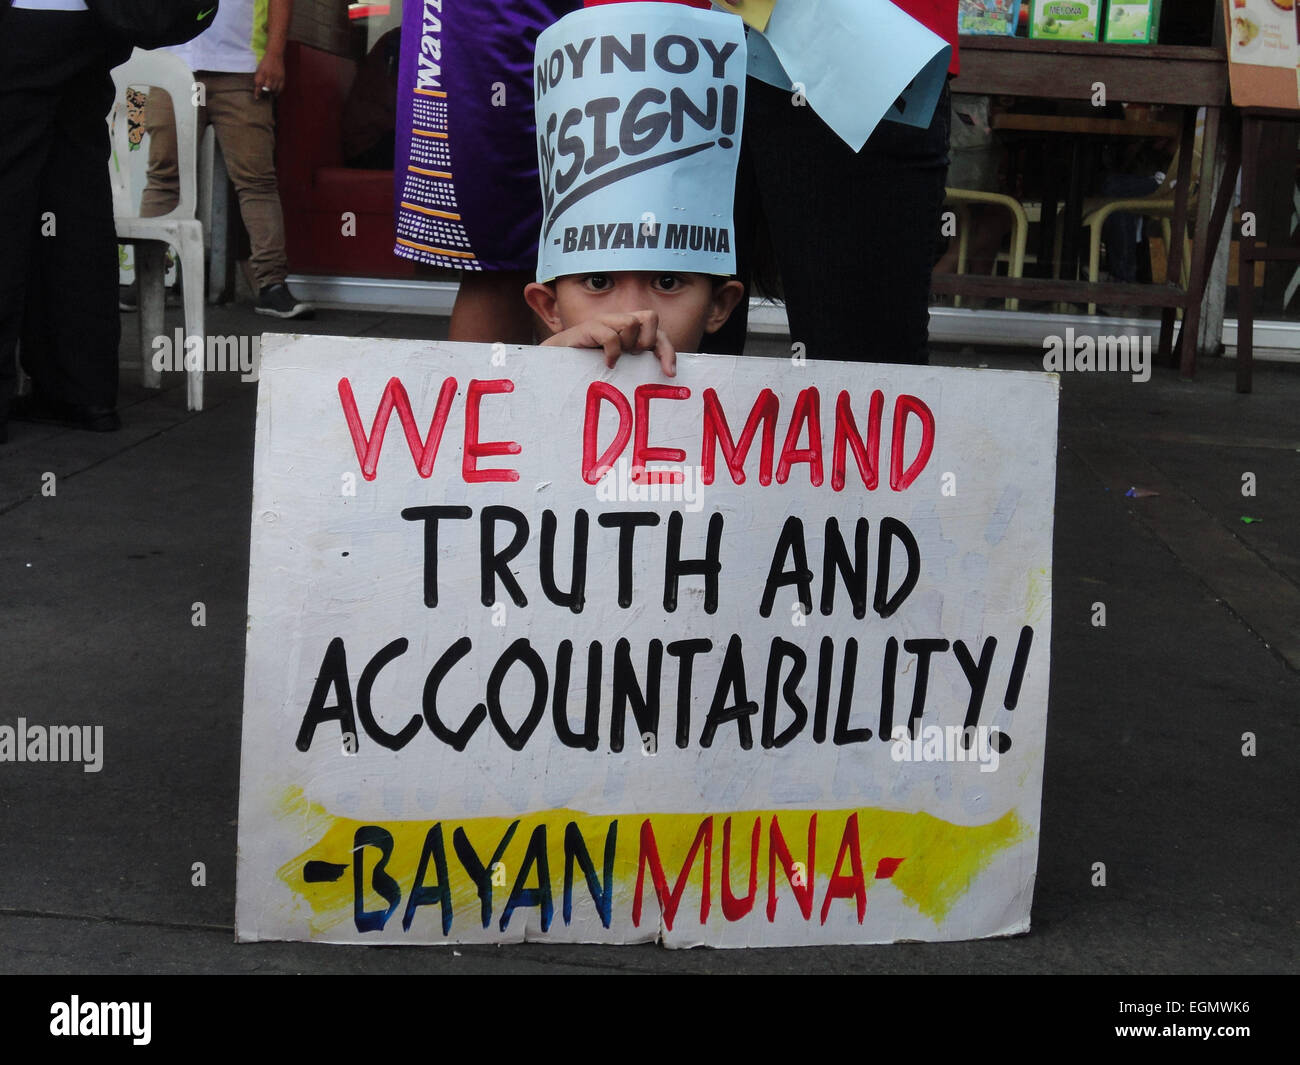 Manila, Philippines. 27th February, 2015. A child wearing a placard calling for the resignation of President Benigno Aquino III takes a rest during a rally at Mendiola Bridge near Malacanang Palace. The protesters are calling for the resignation of President Aquino over the Mamasapano incident that resulted in the deaths of wanted Malaysian bombmaker Zulkifri 'Marwan' bin Hir, 44 police commandos, 18 Muslim rebels, and 8 civilians. Credit:  Richard James Mendoza/Pacific Press/Alamy Live News Stock Photo